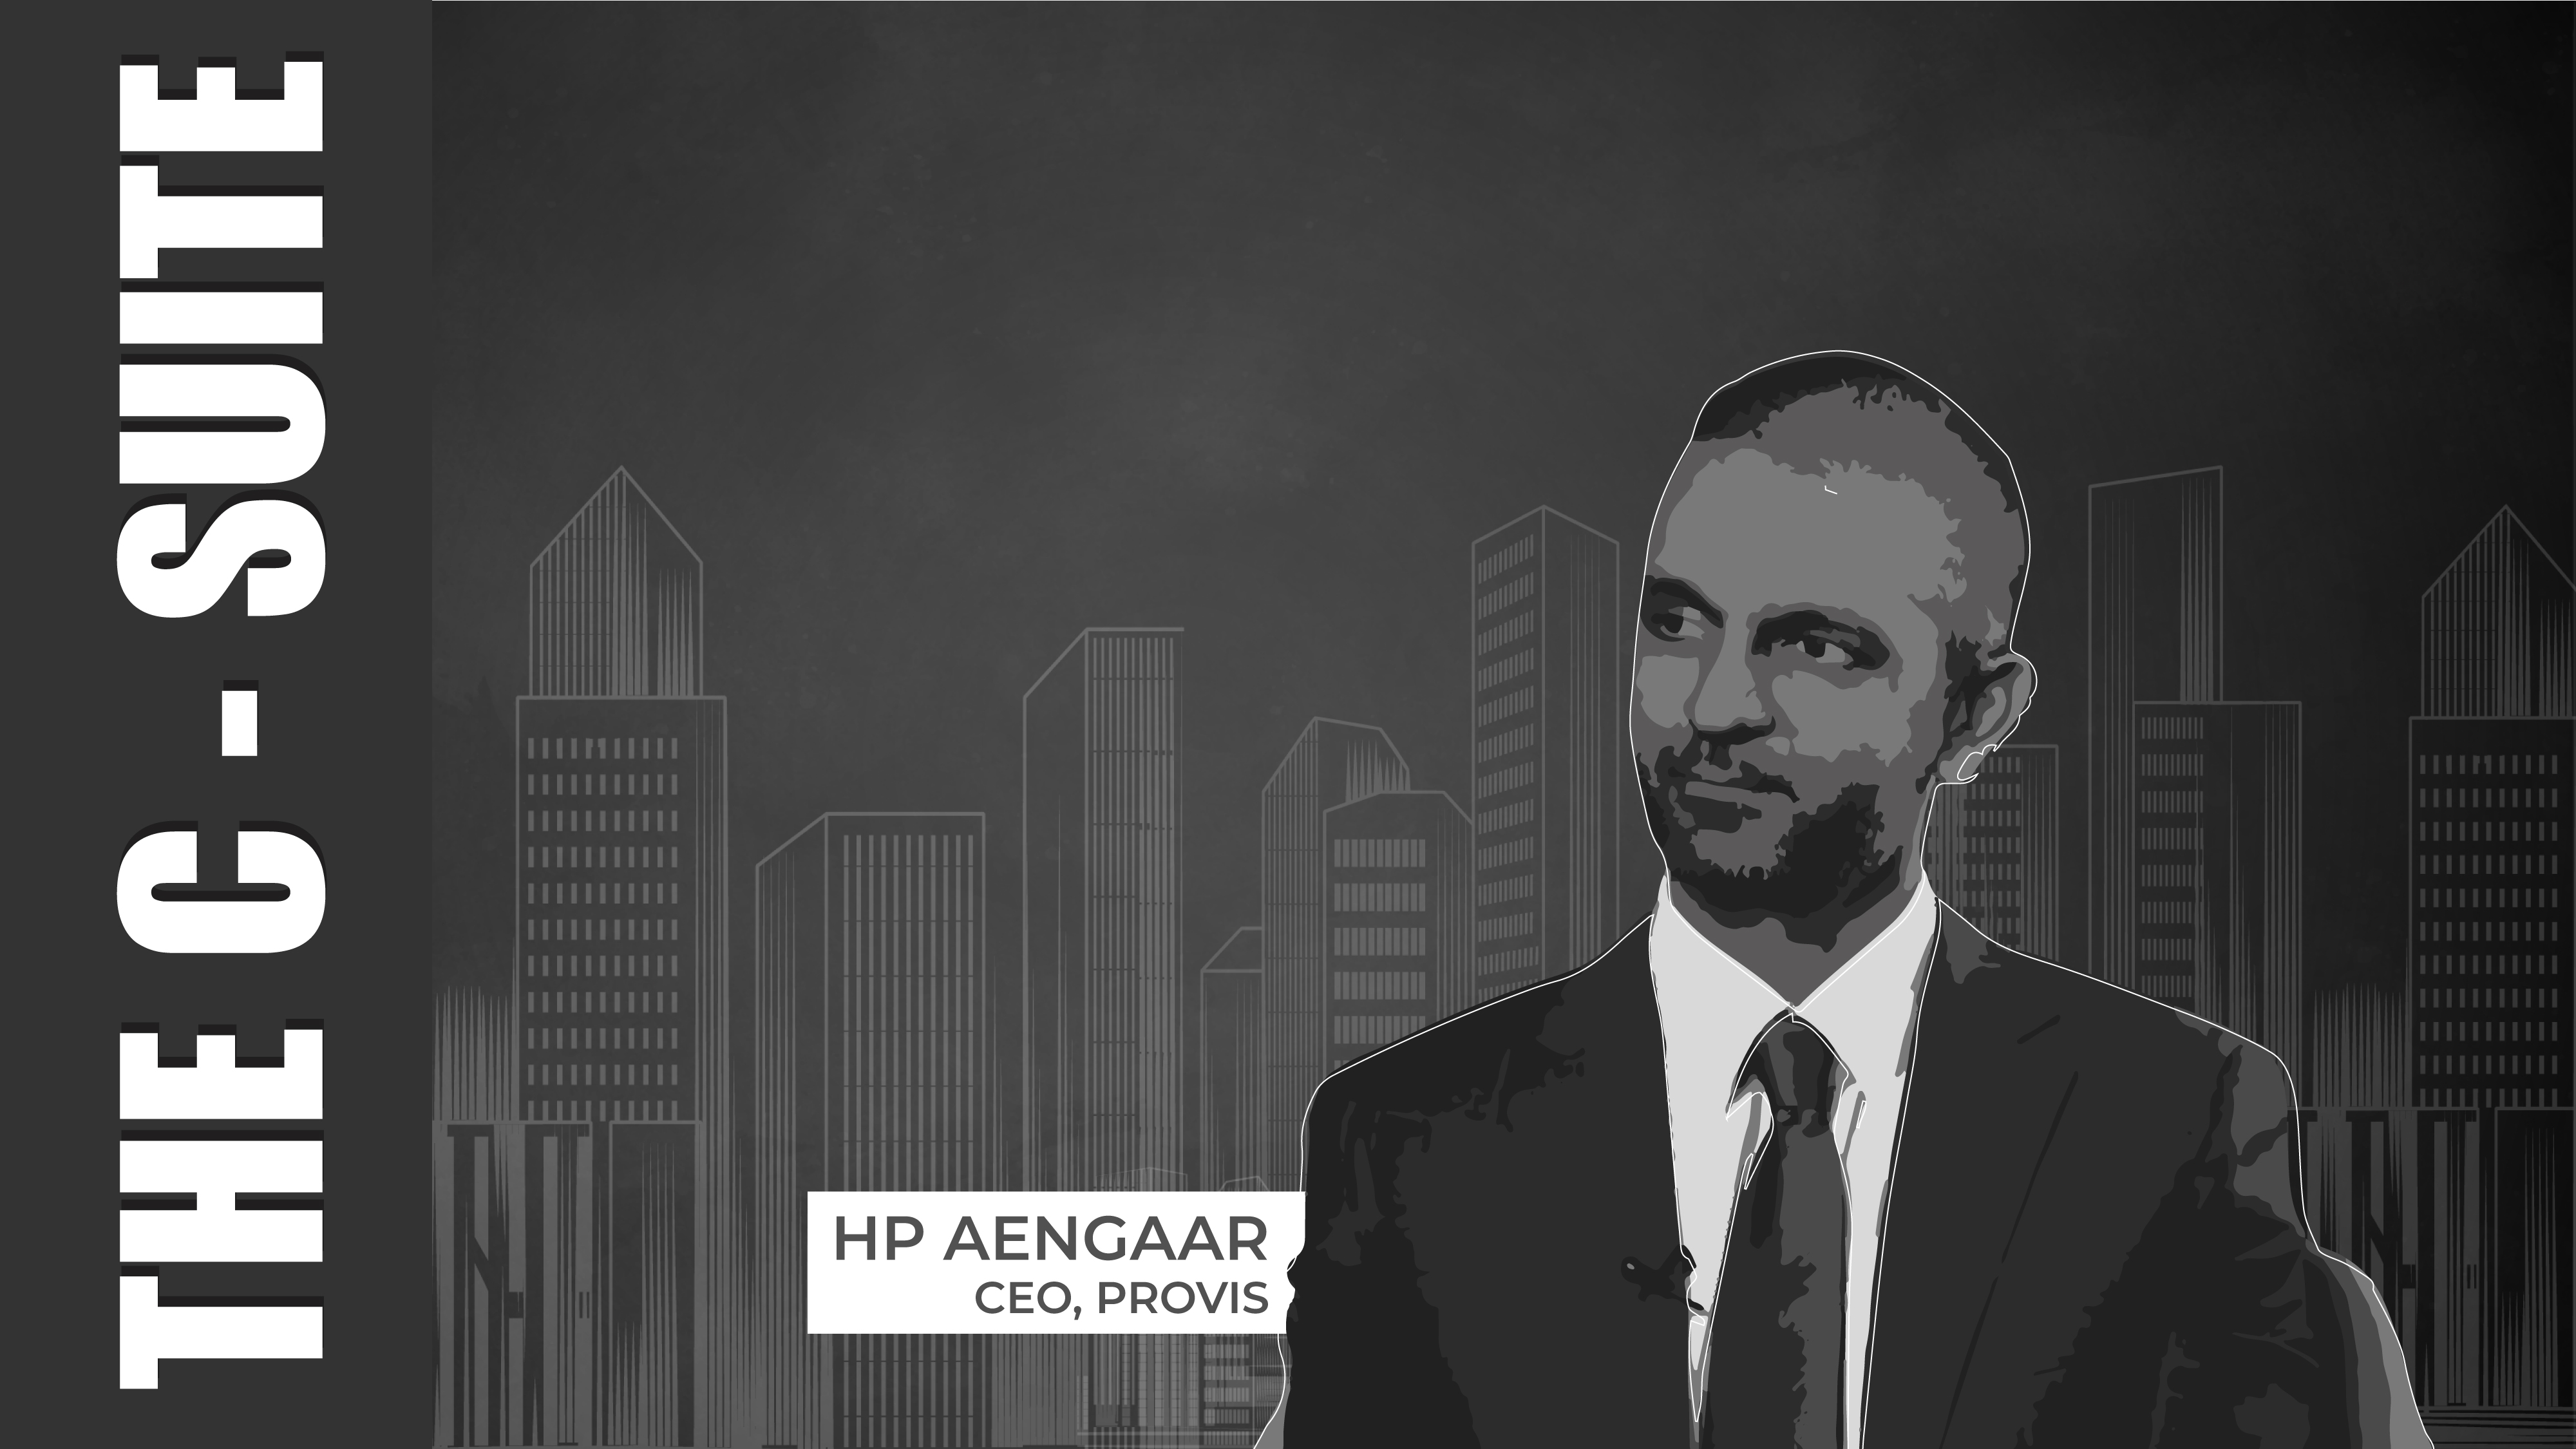 HP Aengaar, CEO of Provis speaks on becoming a market leader in UAE’s built environment & more | The C-Suite